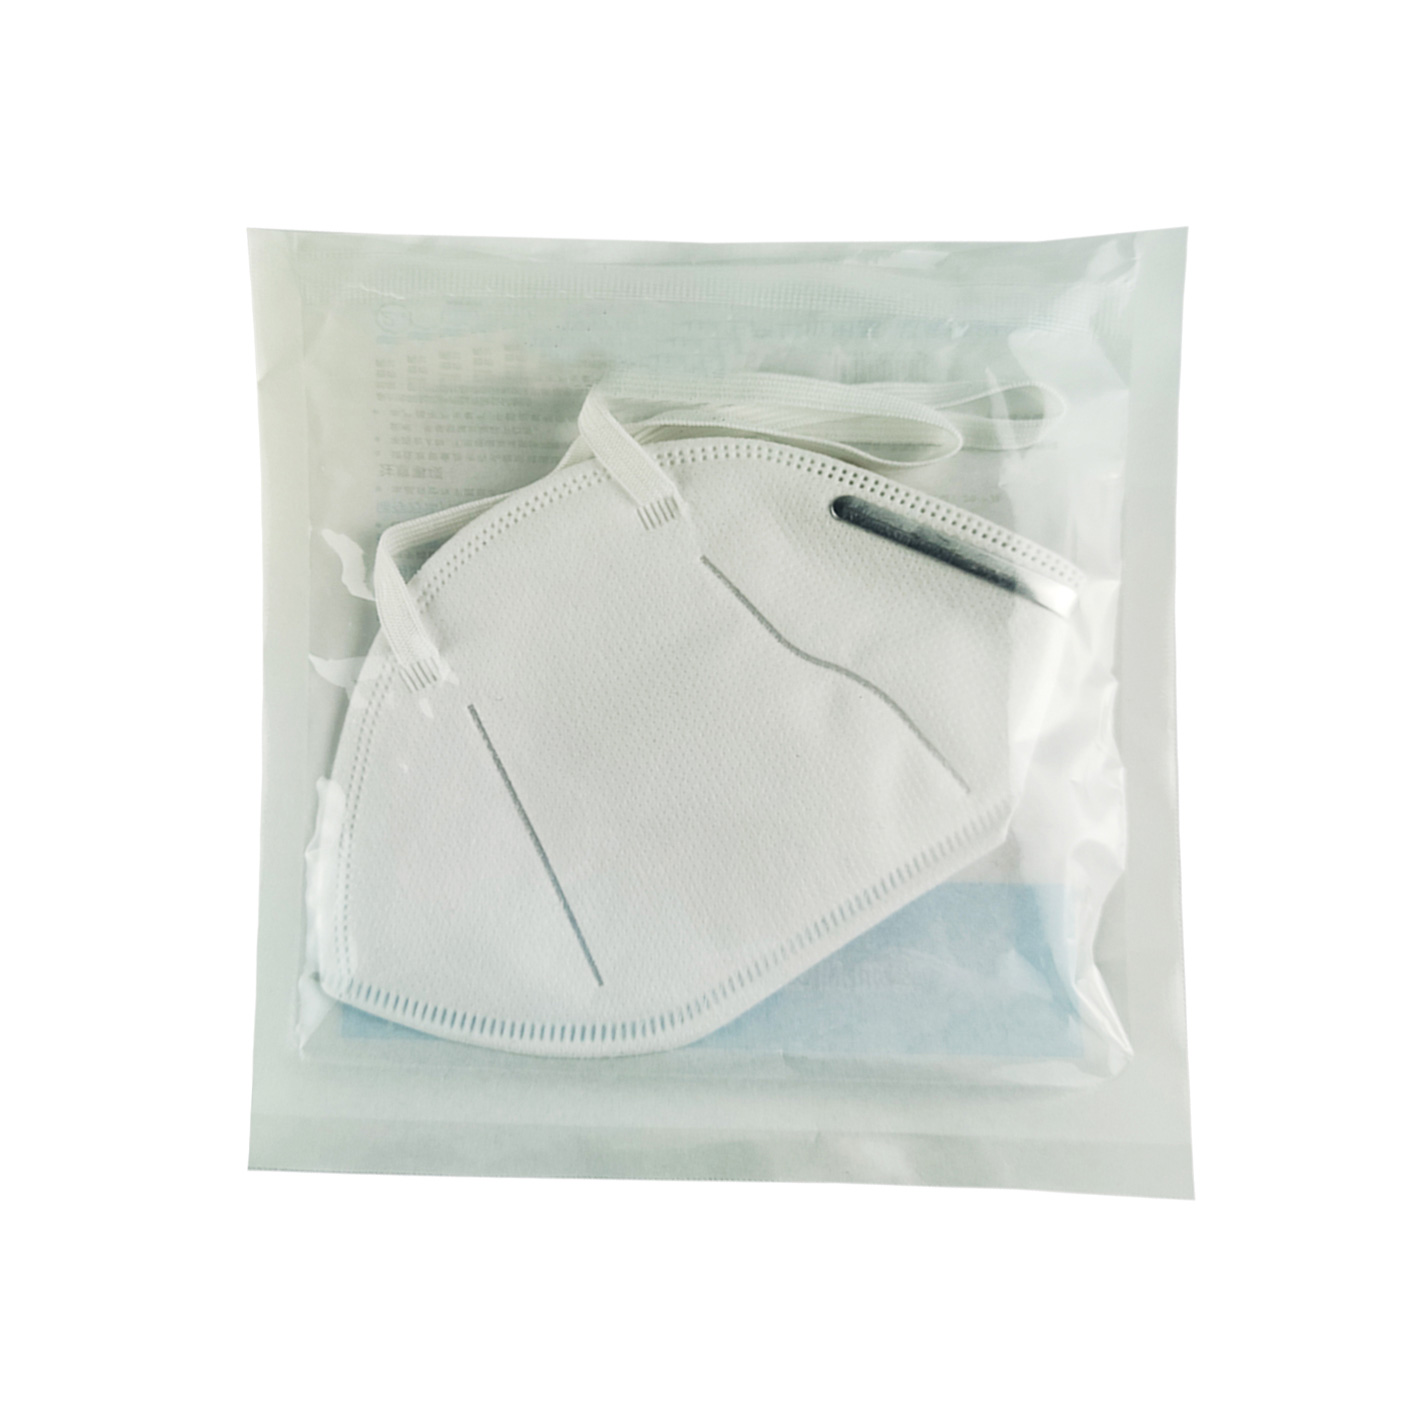 Fast Delivery KN95 Dustproof Anti-fog And Breathable Face Masks N95 Mask 95% Filtration